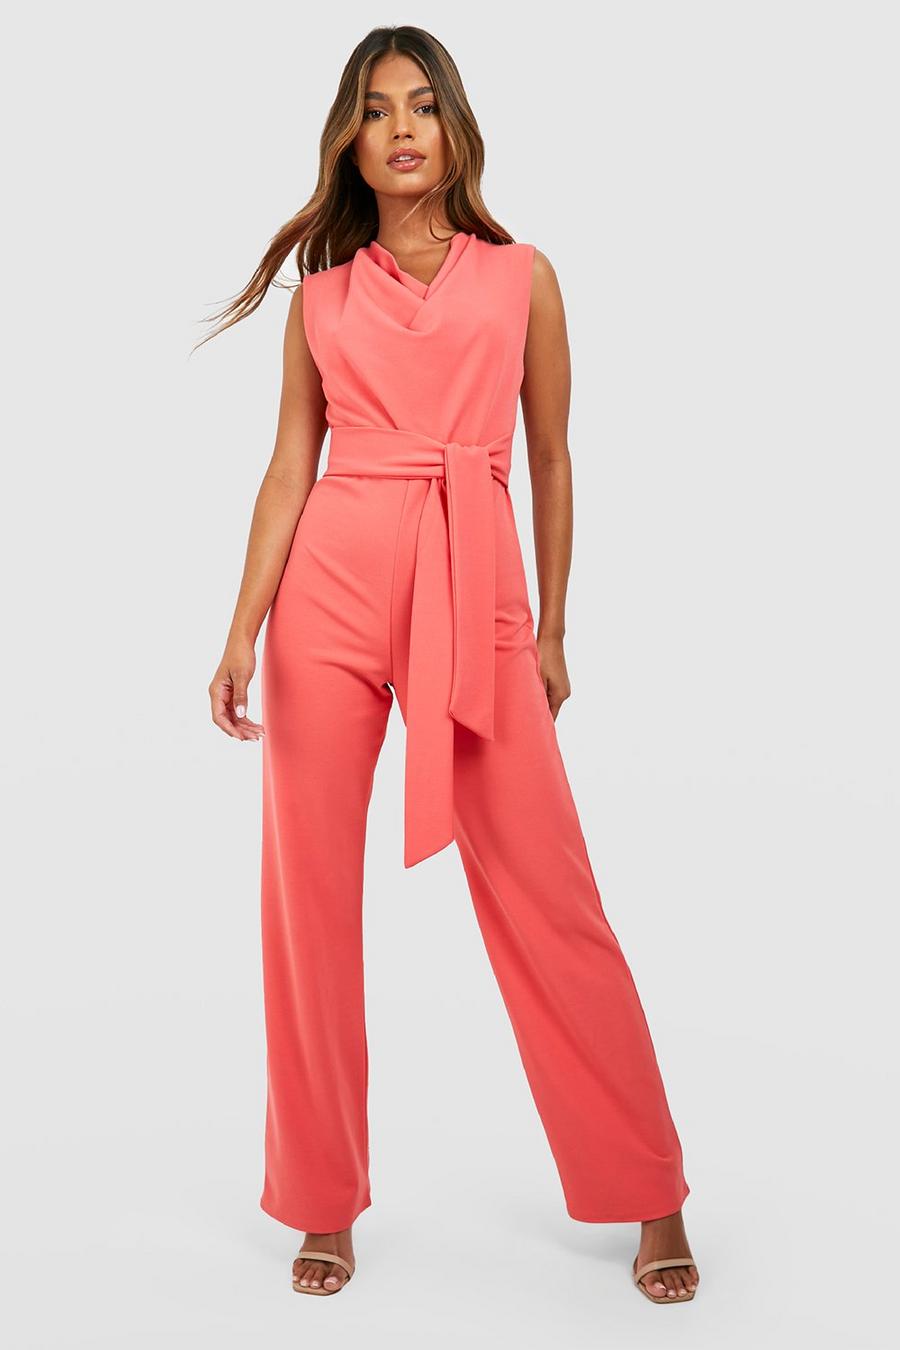 Coral pink Tailored Draped Tie Waist Straight Leg Jumpsuit image number 1